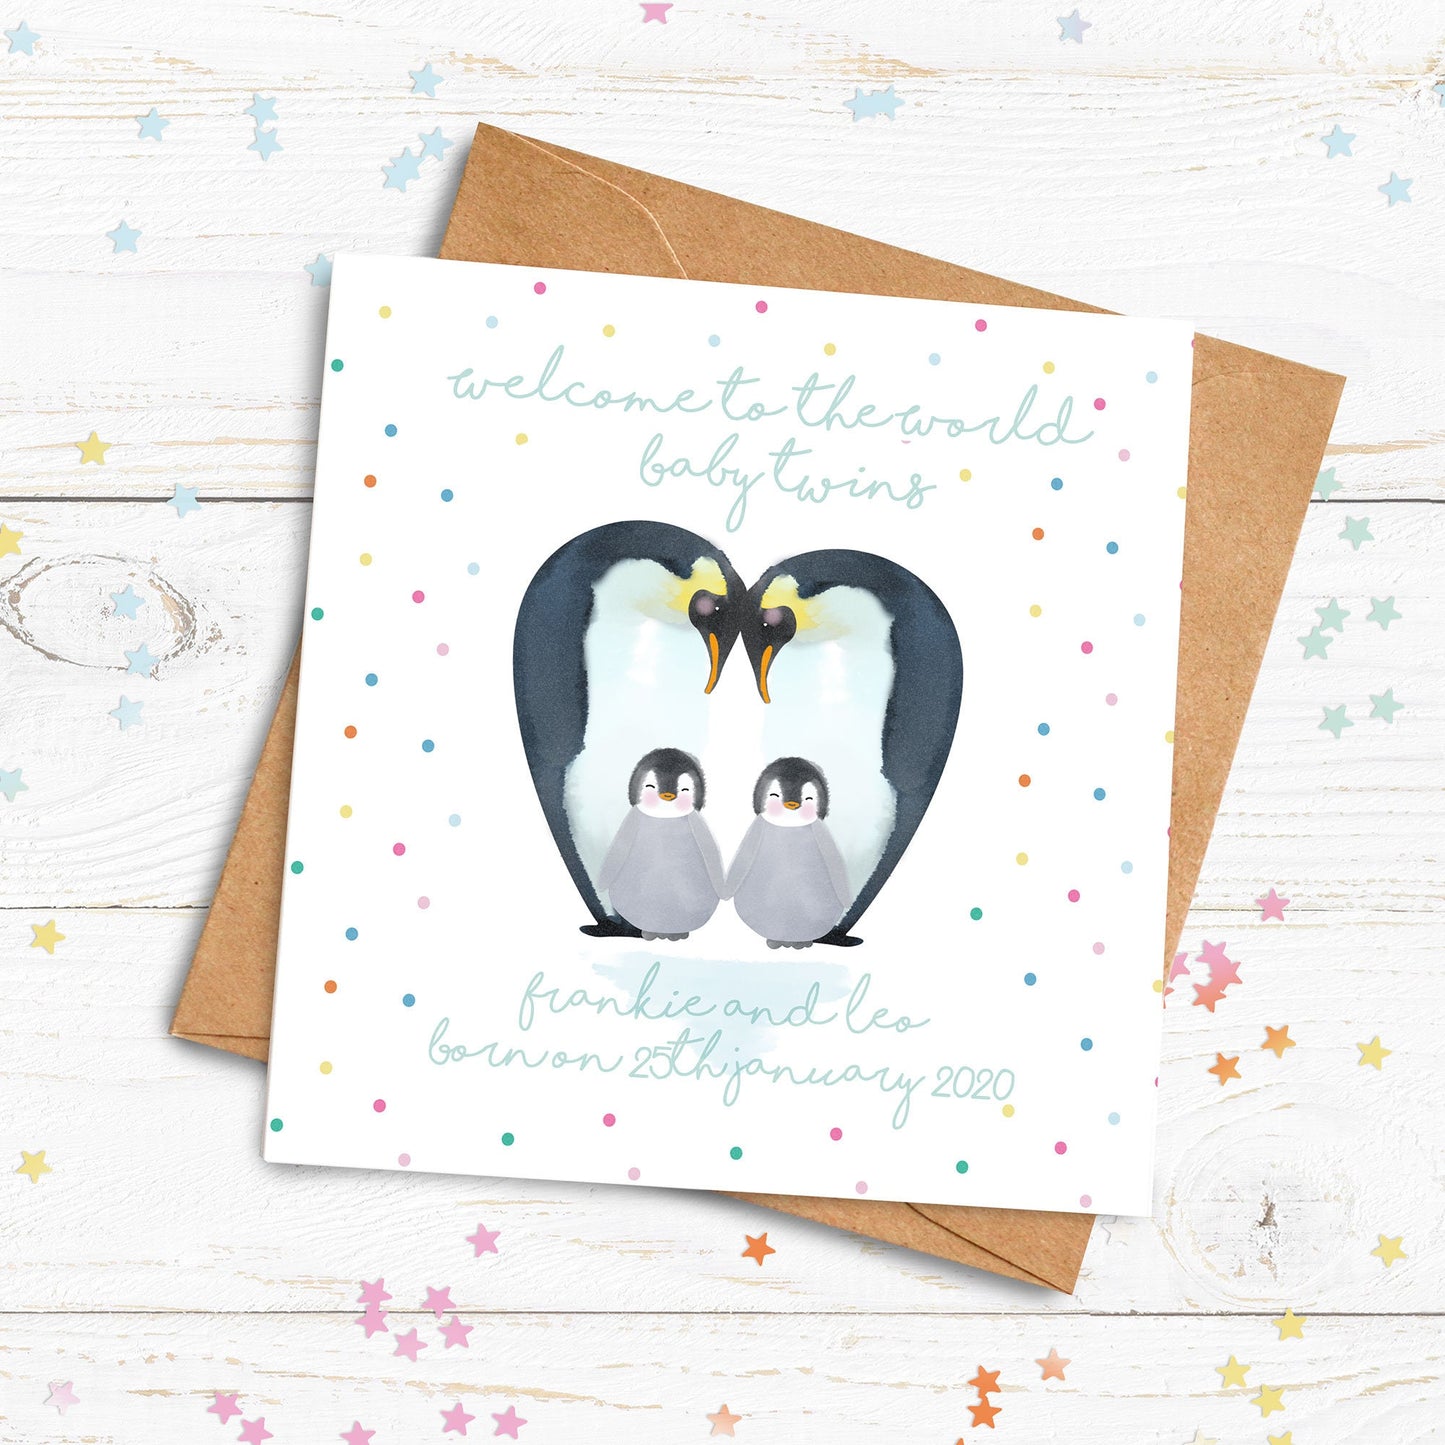 Baby Twins Penguin Card. Personalised New Baby Card. Cute Penguin Card. Cards for twins. Send Direct Option.